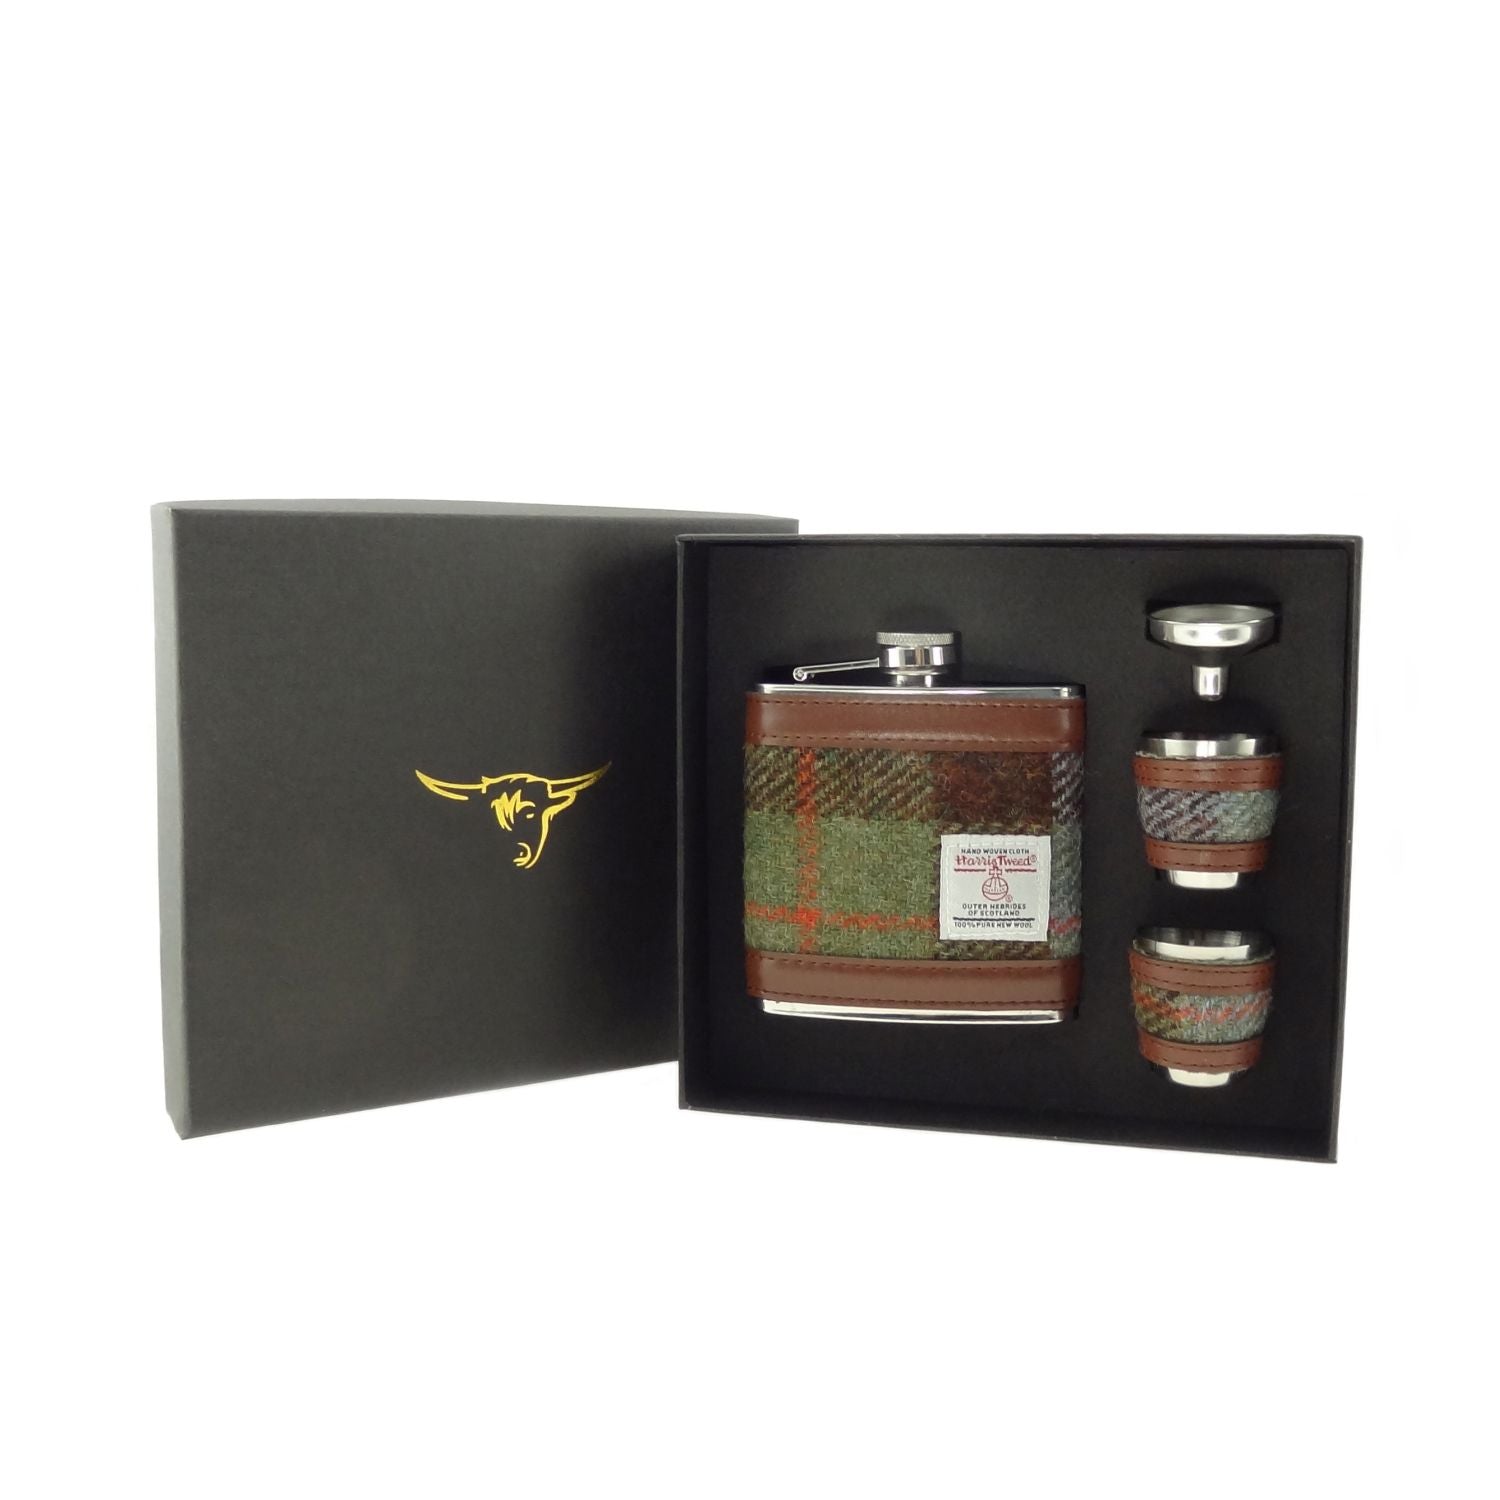 Hip Flask Gift Set with Harris Tweed® in Gift Box